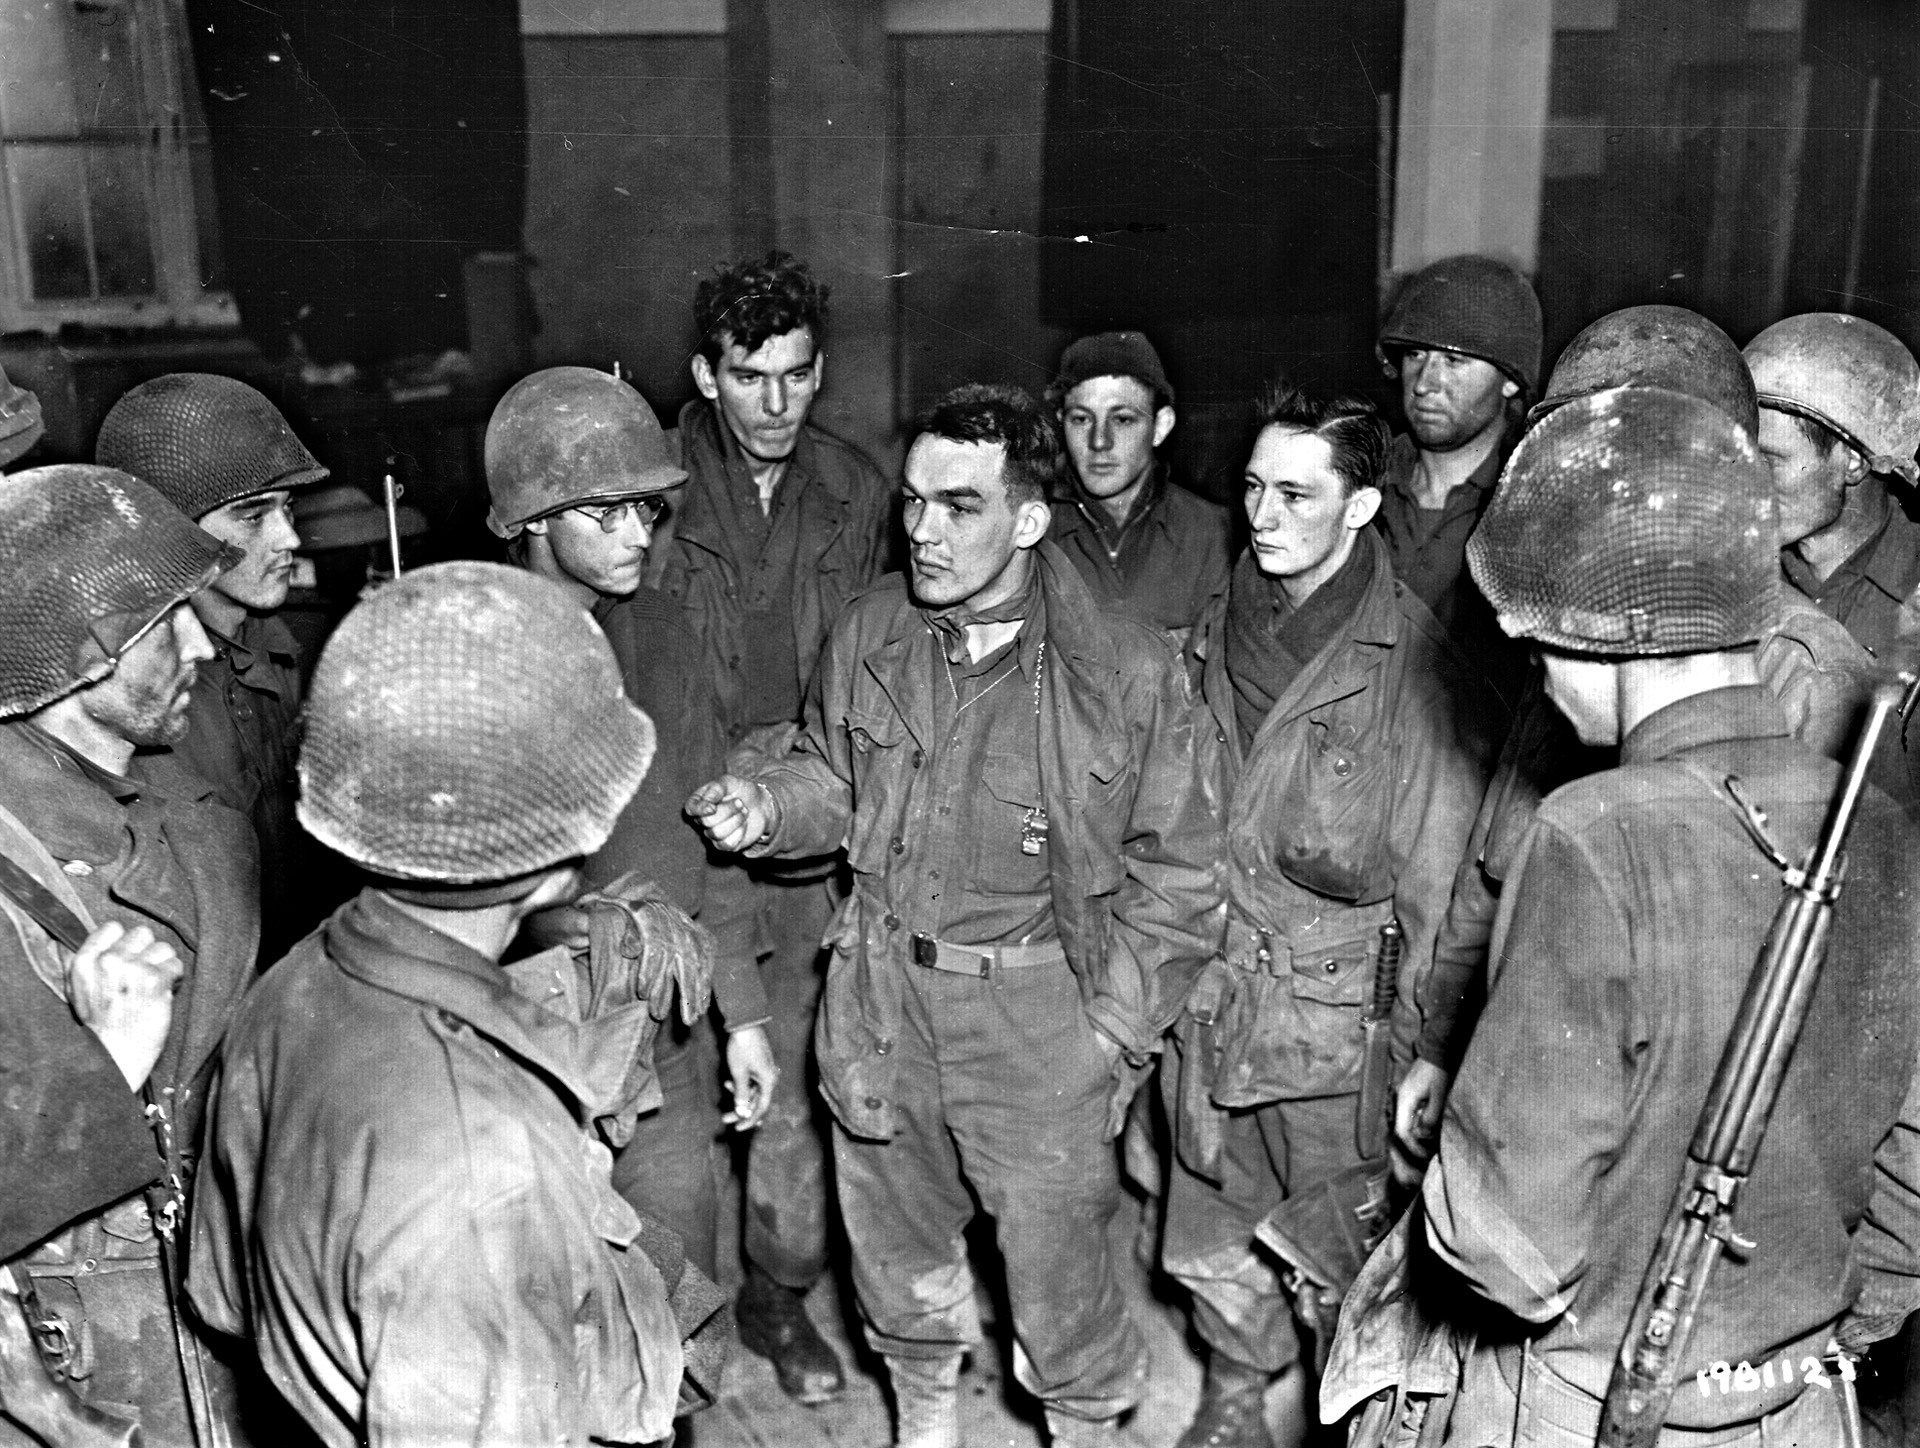 Lieutenant Ivan Long, center, talks with members of his Intelligence and Reconnaissance Platoon, 423rd Infantry Regiment. These soldiers were among the few who escaped the the advancing Germans on the Schnee Eifel, making their way to American lines around St. Vith.